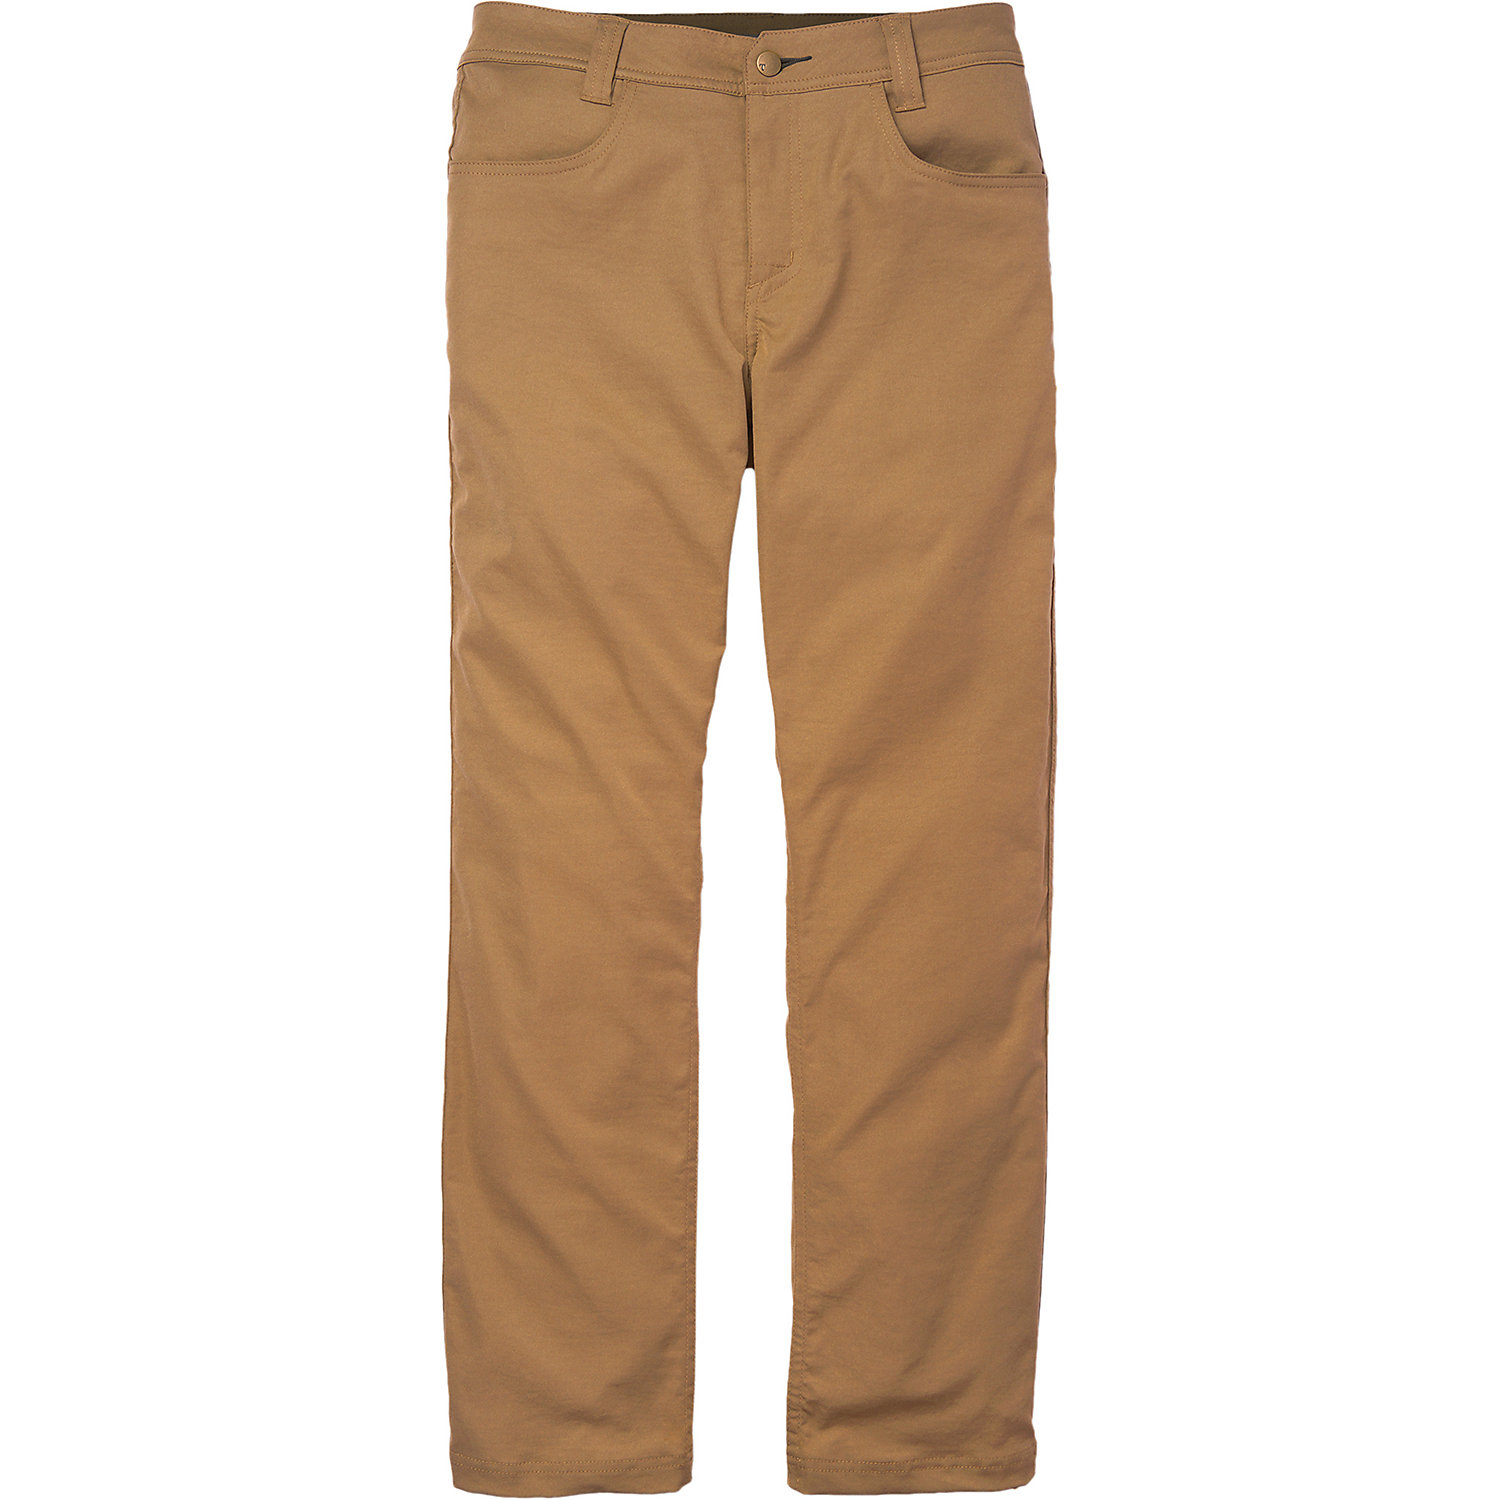 Toad & Co Mens Rover Pant